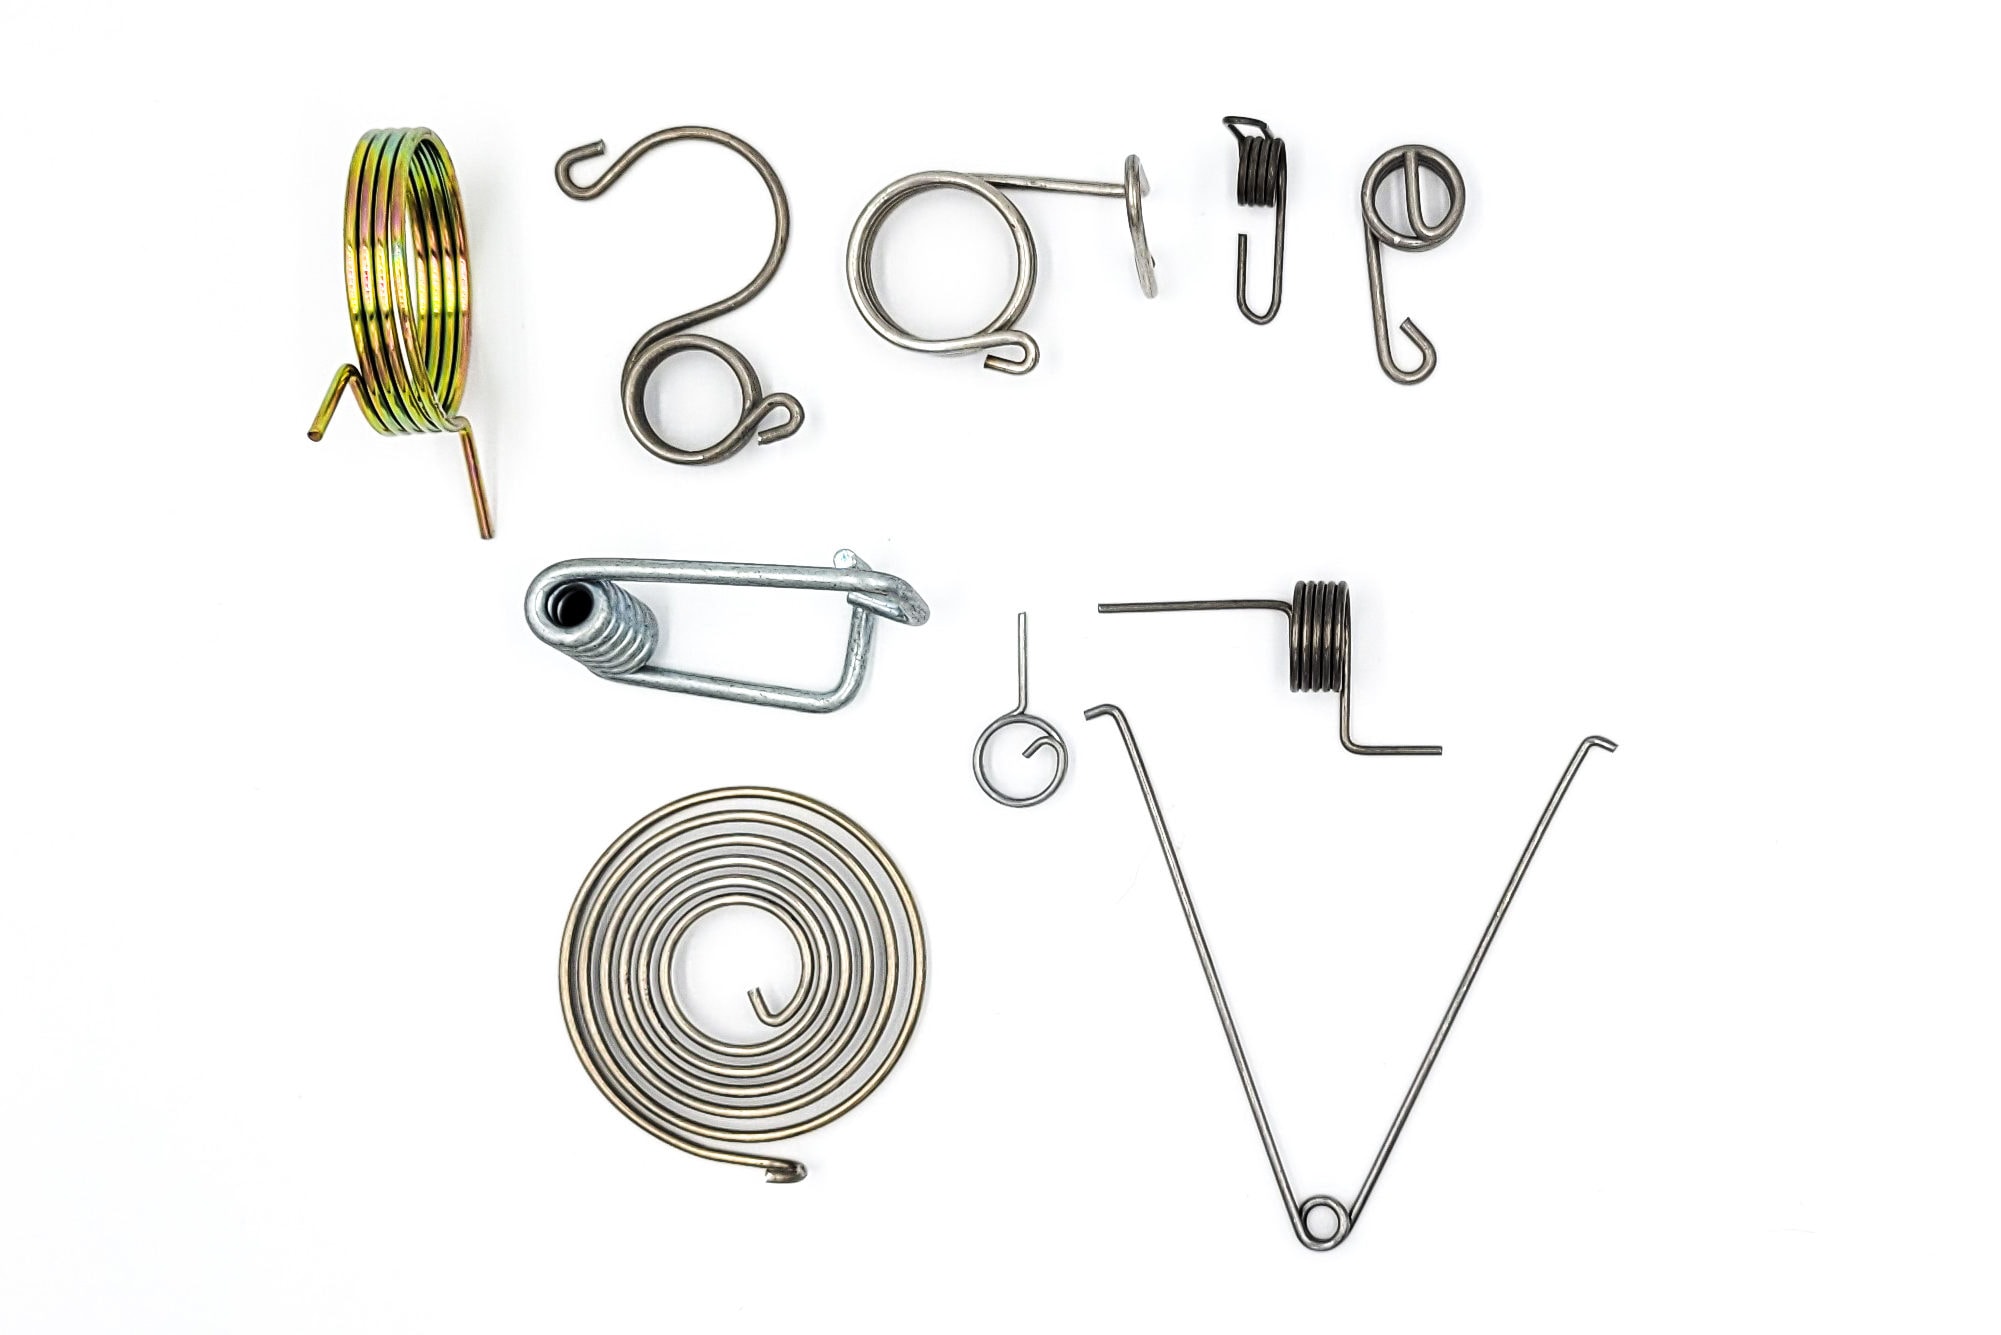 Custom Springs, Rings, Wire Forms, and Welded Wire Assemblies